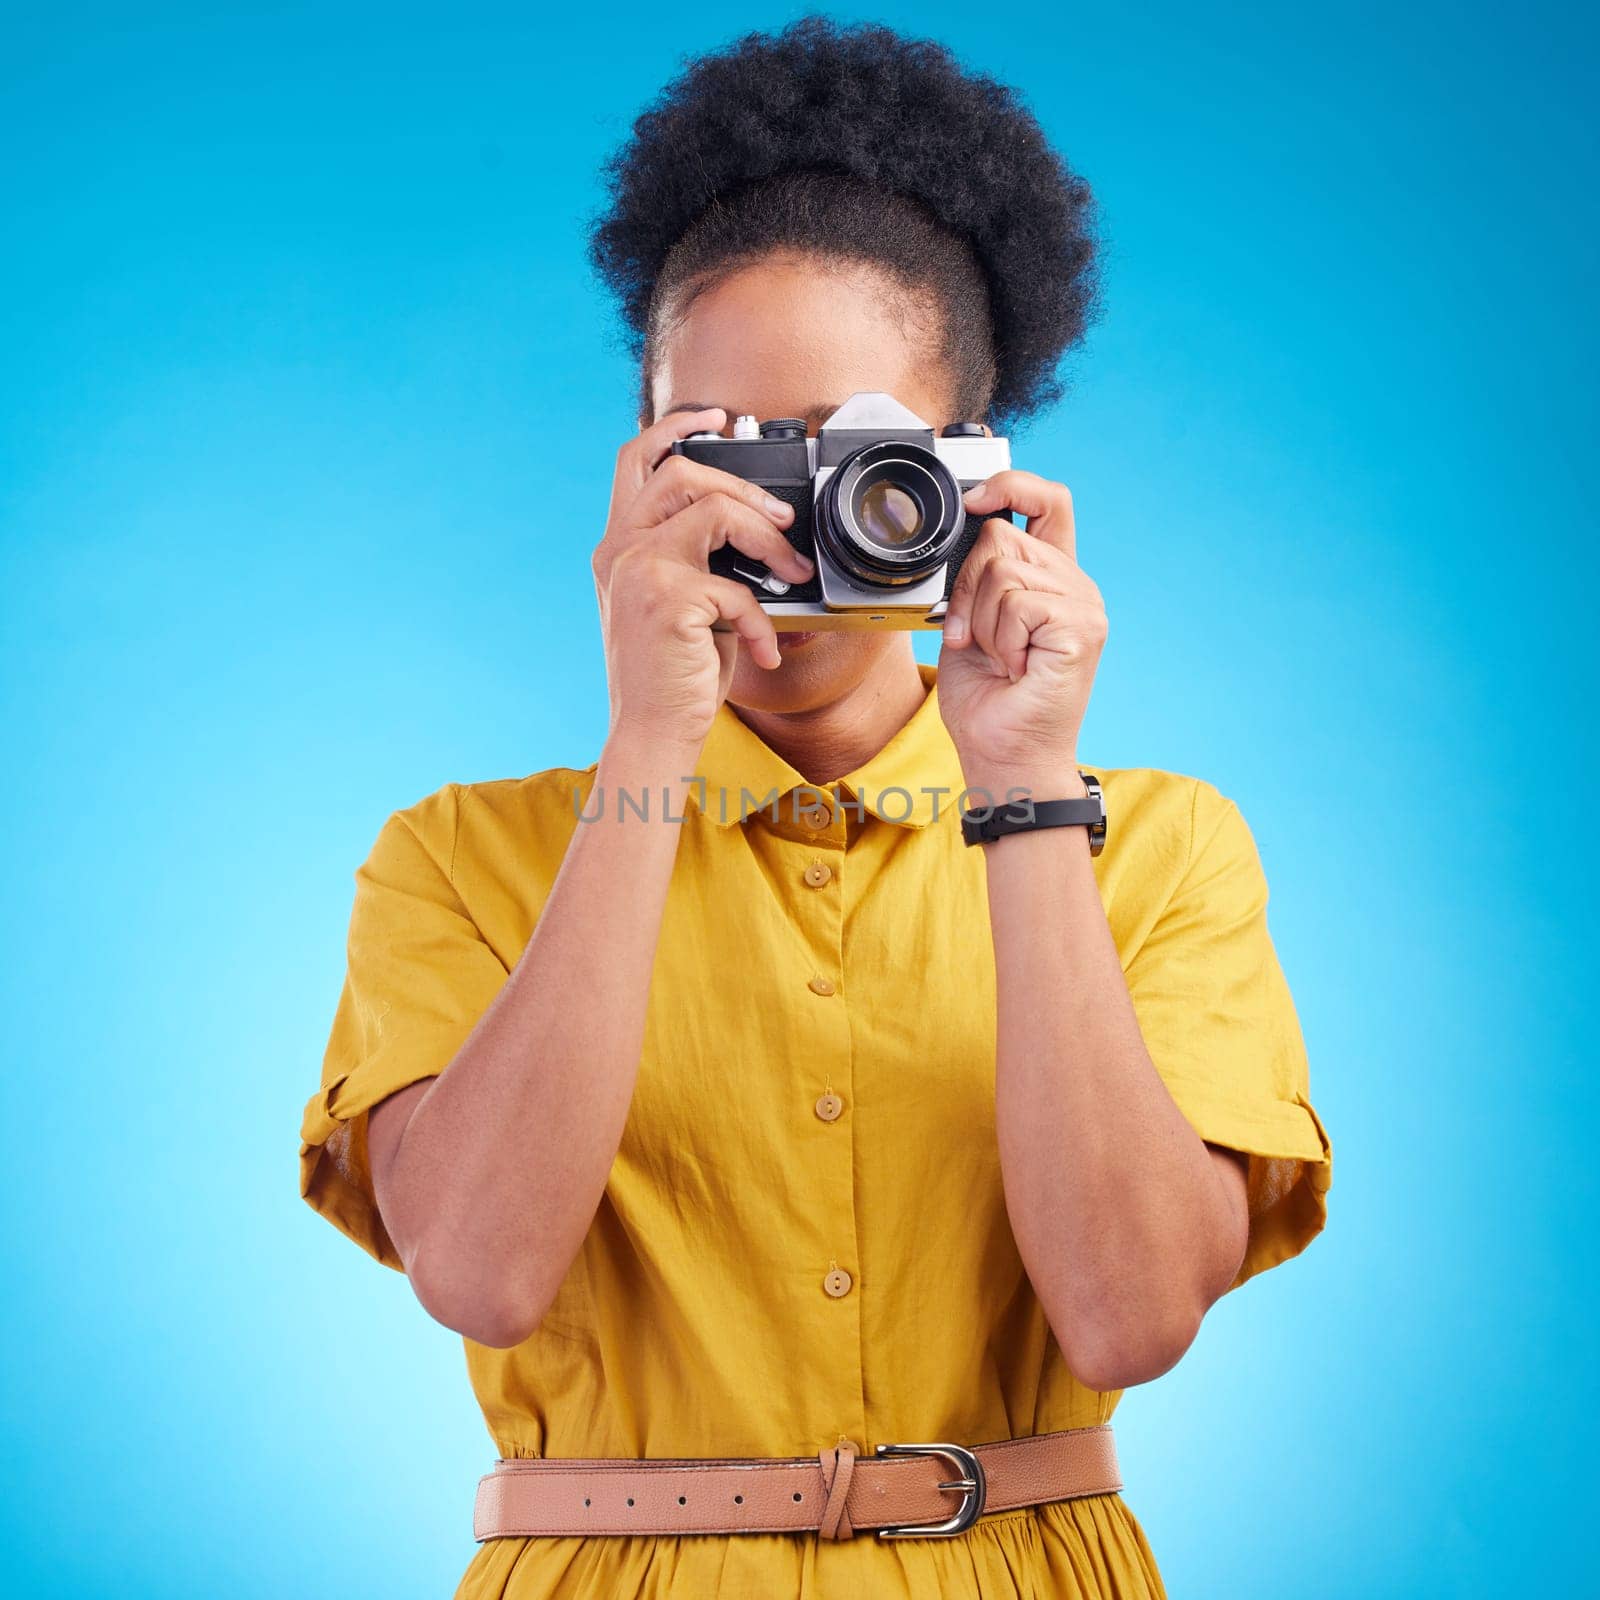 Photography, travel and black woman with camera isolated on blue background, creative artist job and talent. Art, face of photographer with hobby or career in studio taking picture for photoshoot